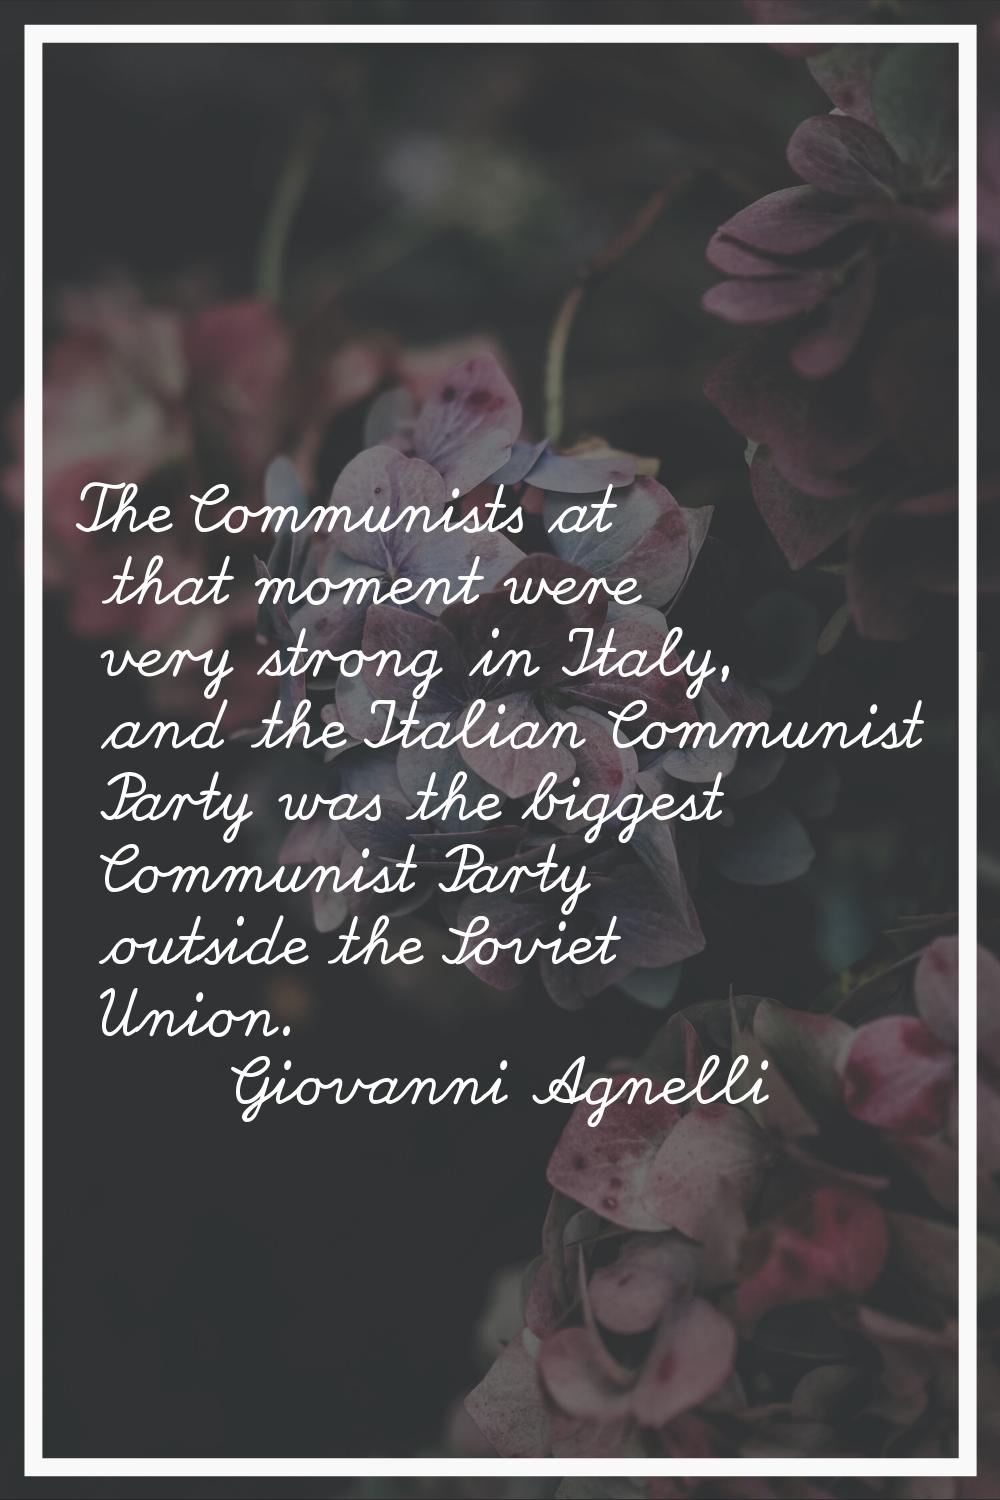 The Communists at that moment were very strong in Italy, and the Italian Communist Party was the bi